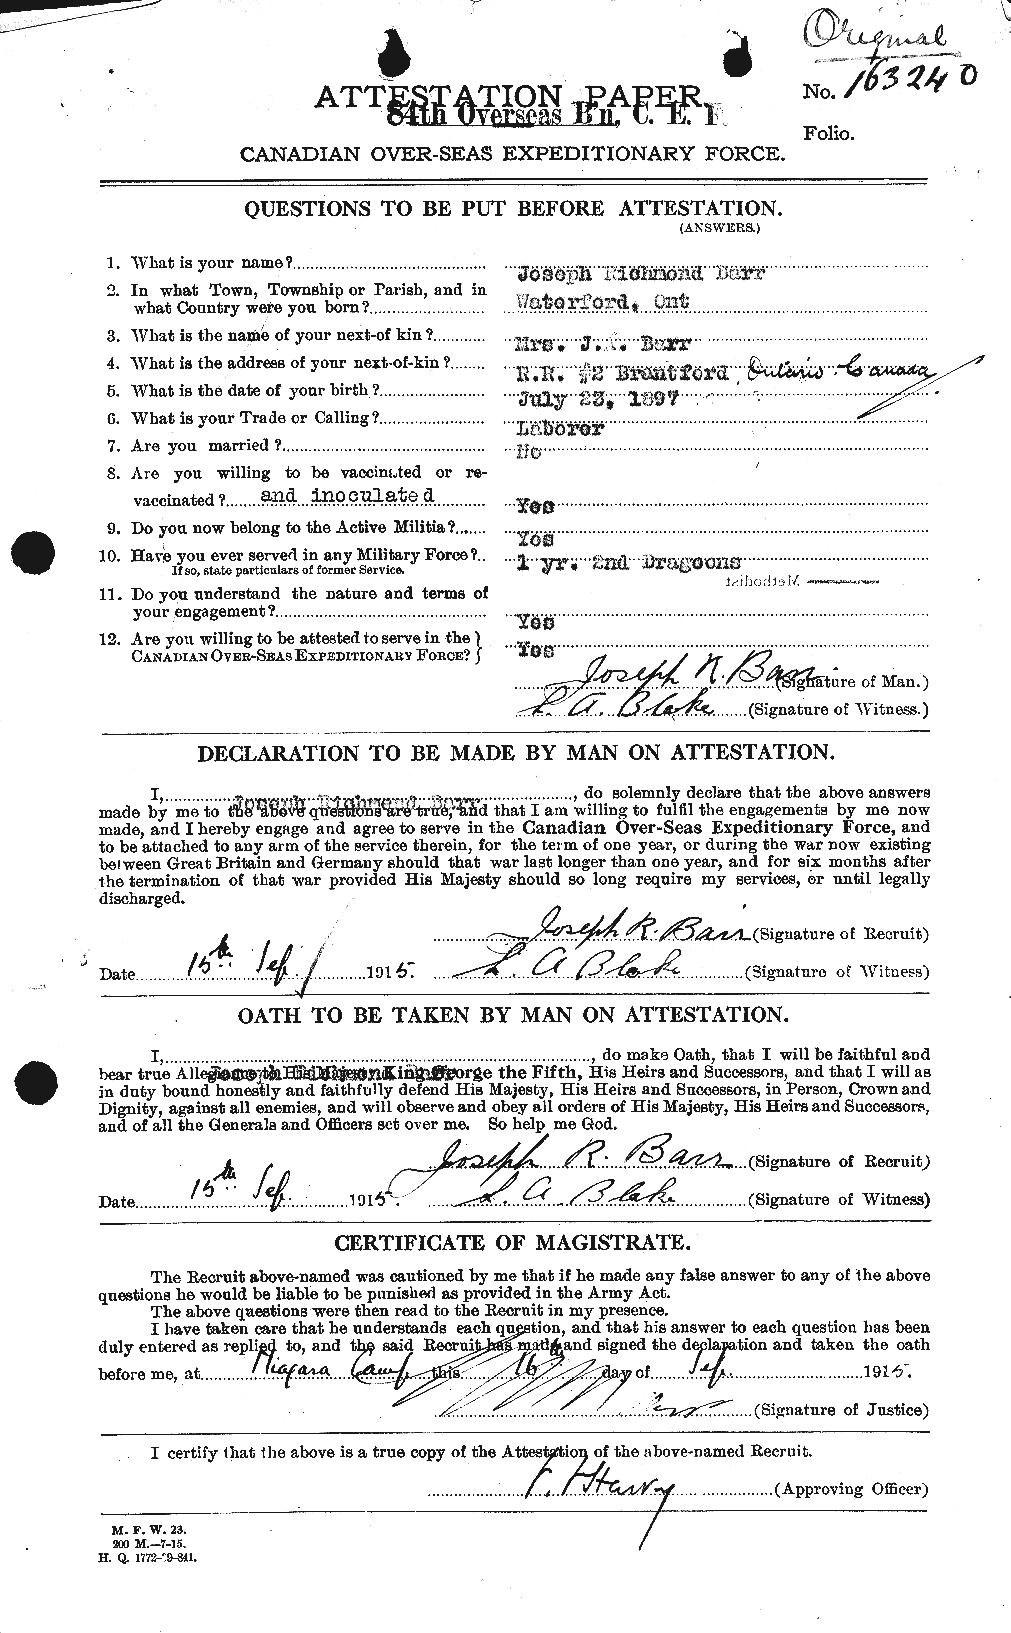 Personnel Records of the First World War - CEF 227868a